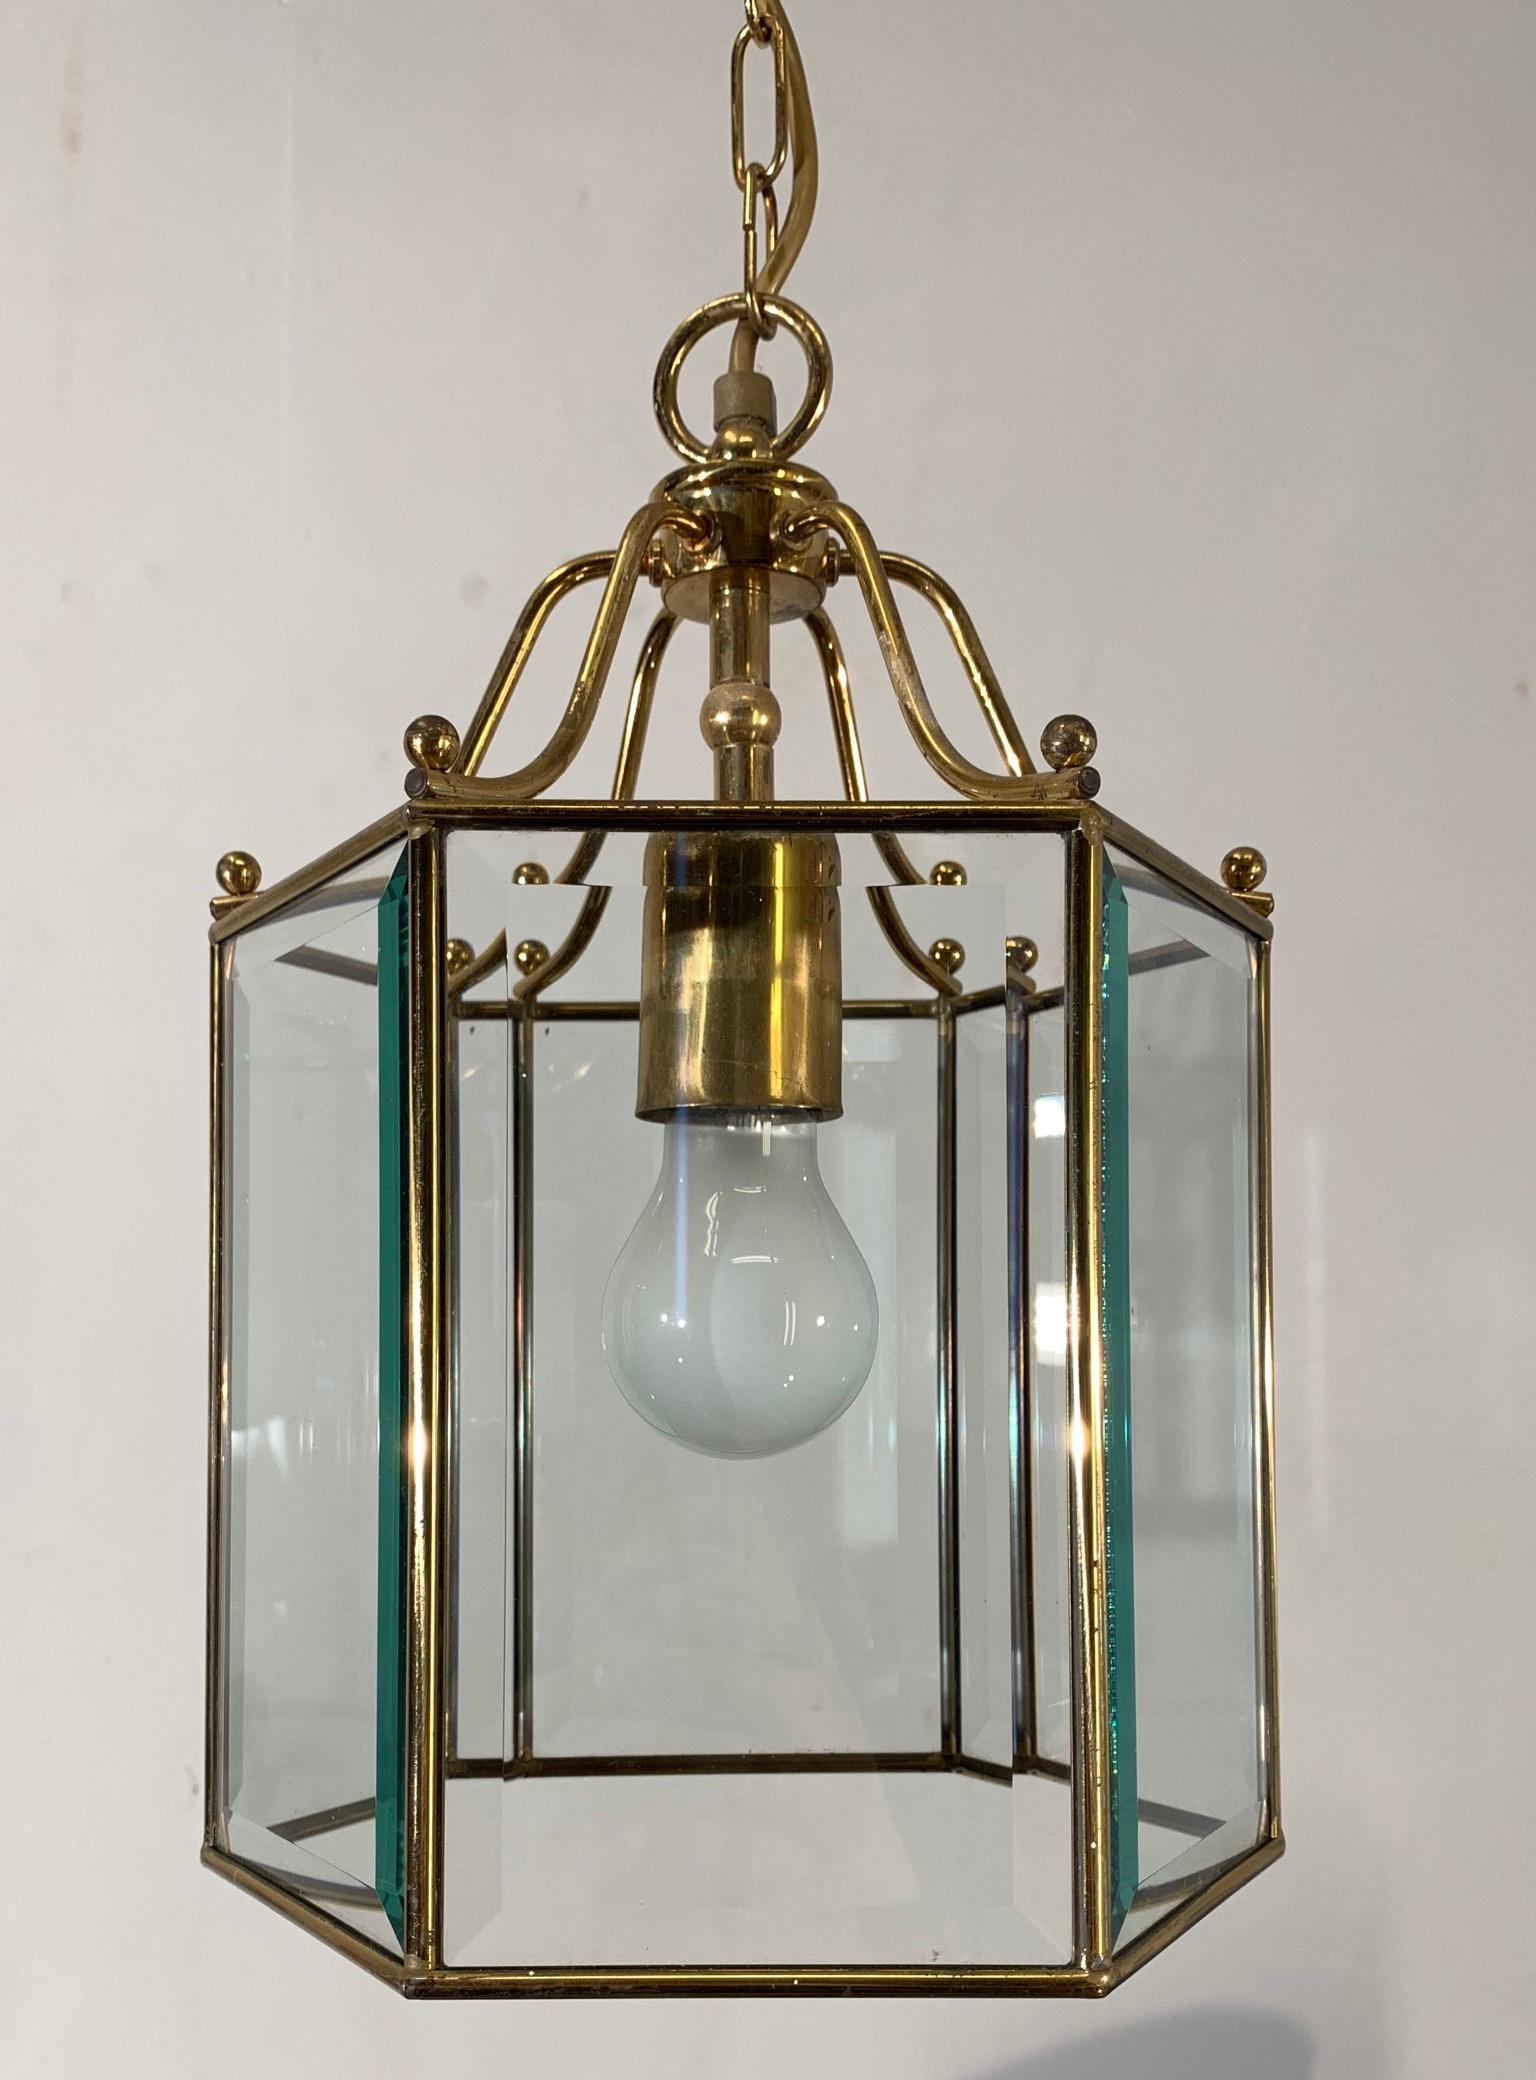 Stylish Late 20th Century Brass & Beveled Glass Hexagonal Pendant Light Fixture In Good Condition For Sale In Lisse, NL